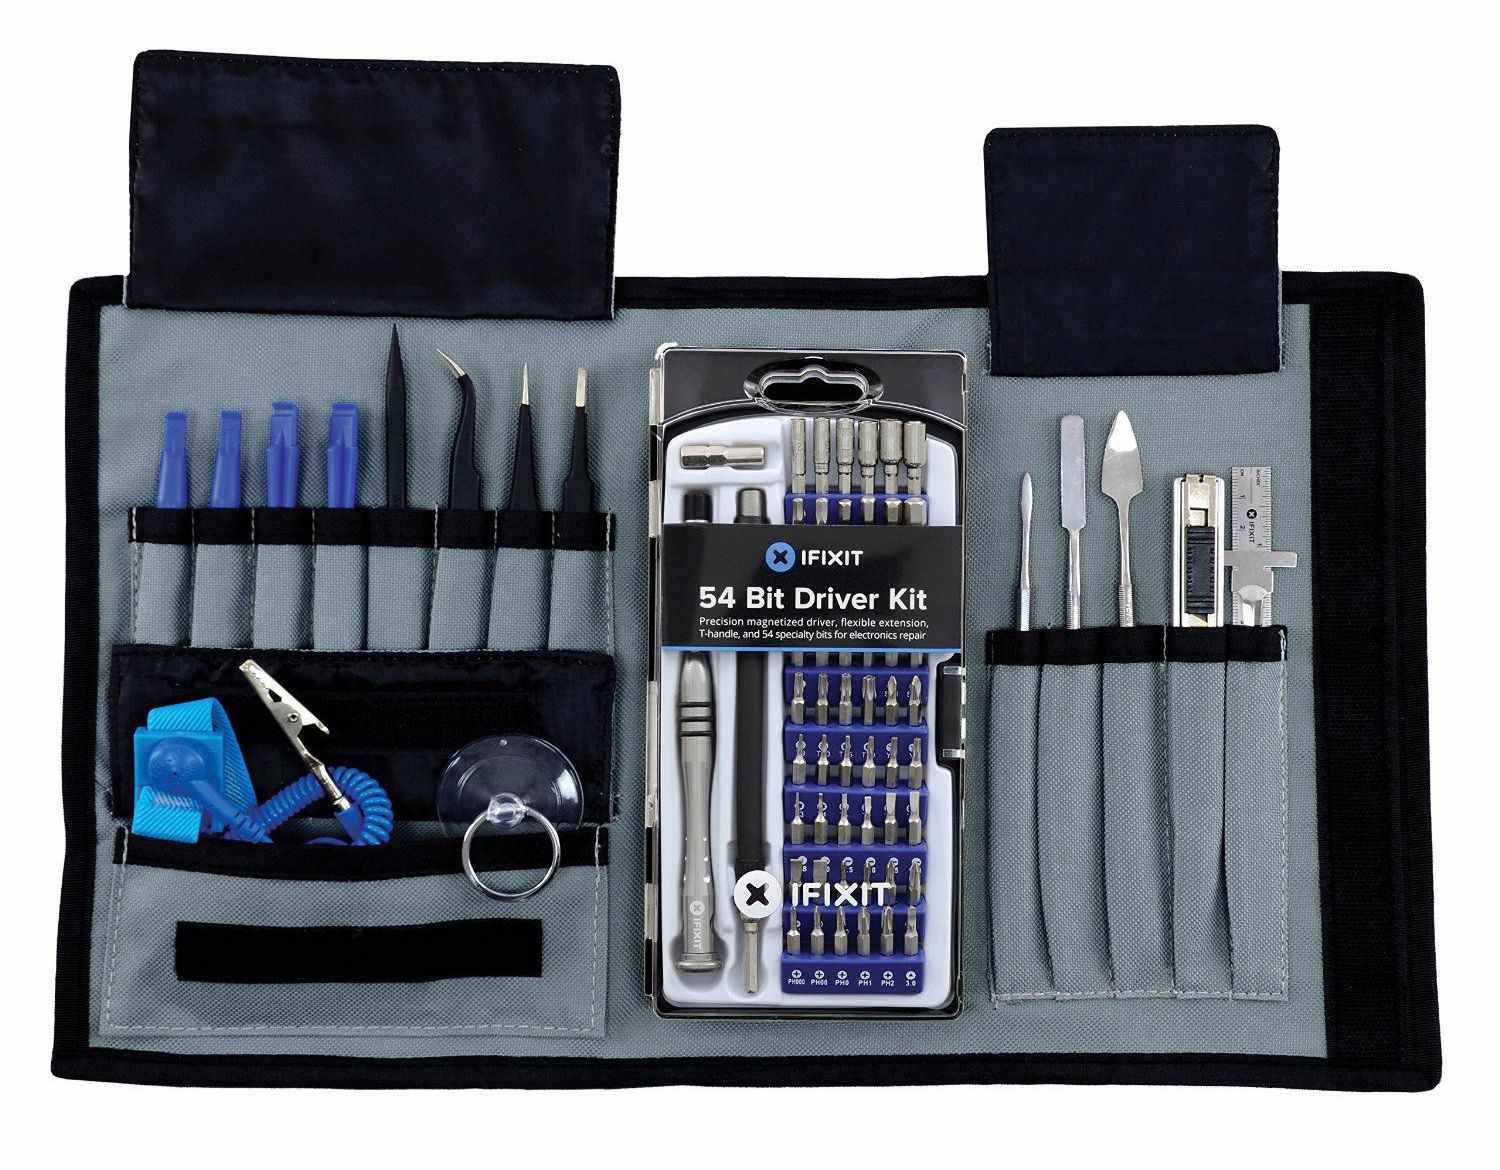 Top Ten Must-Have Tools for Wireless Computer Service Technicians